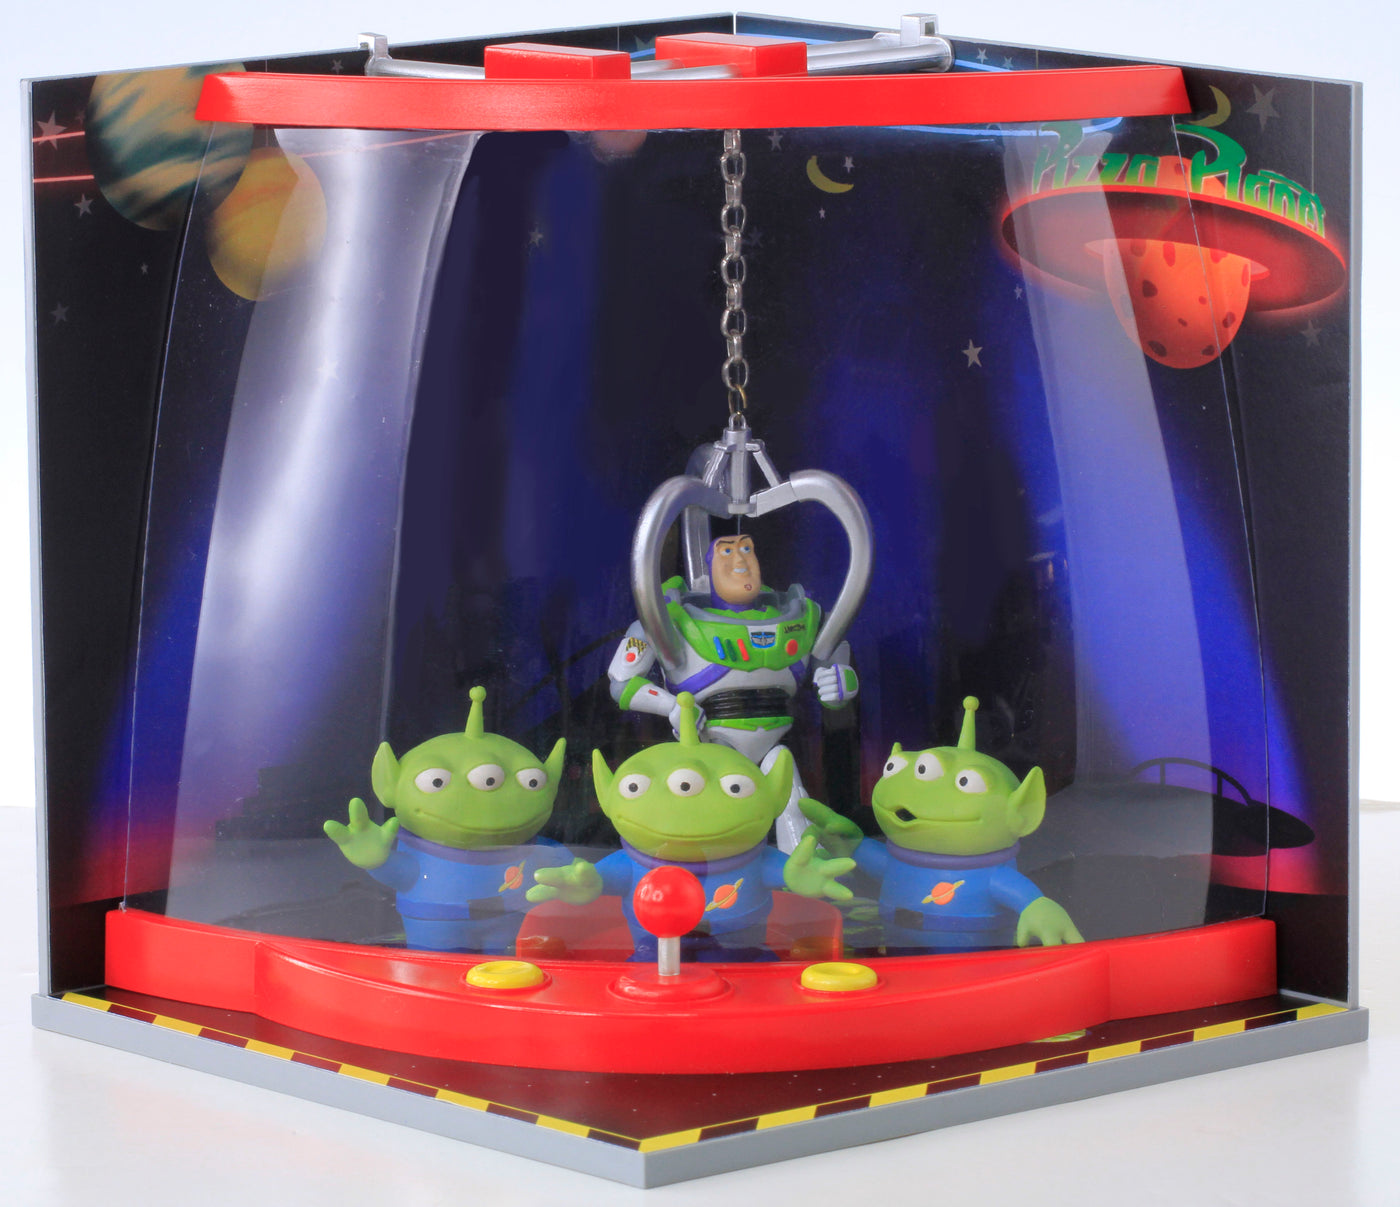 toy story pizza planet playset